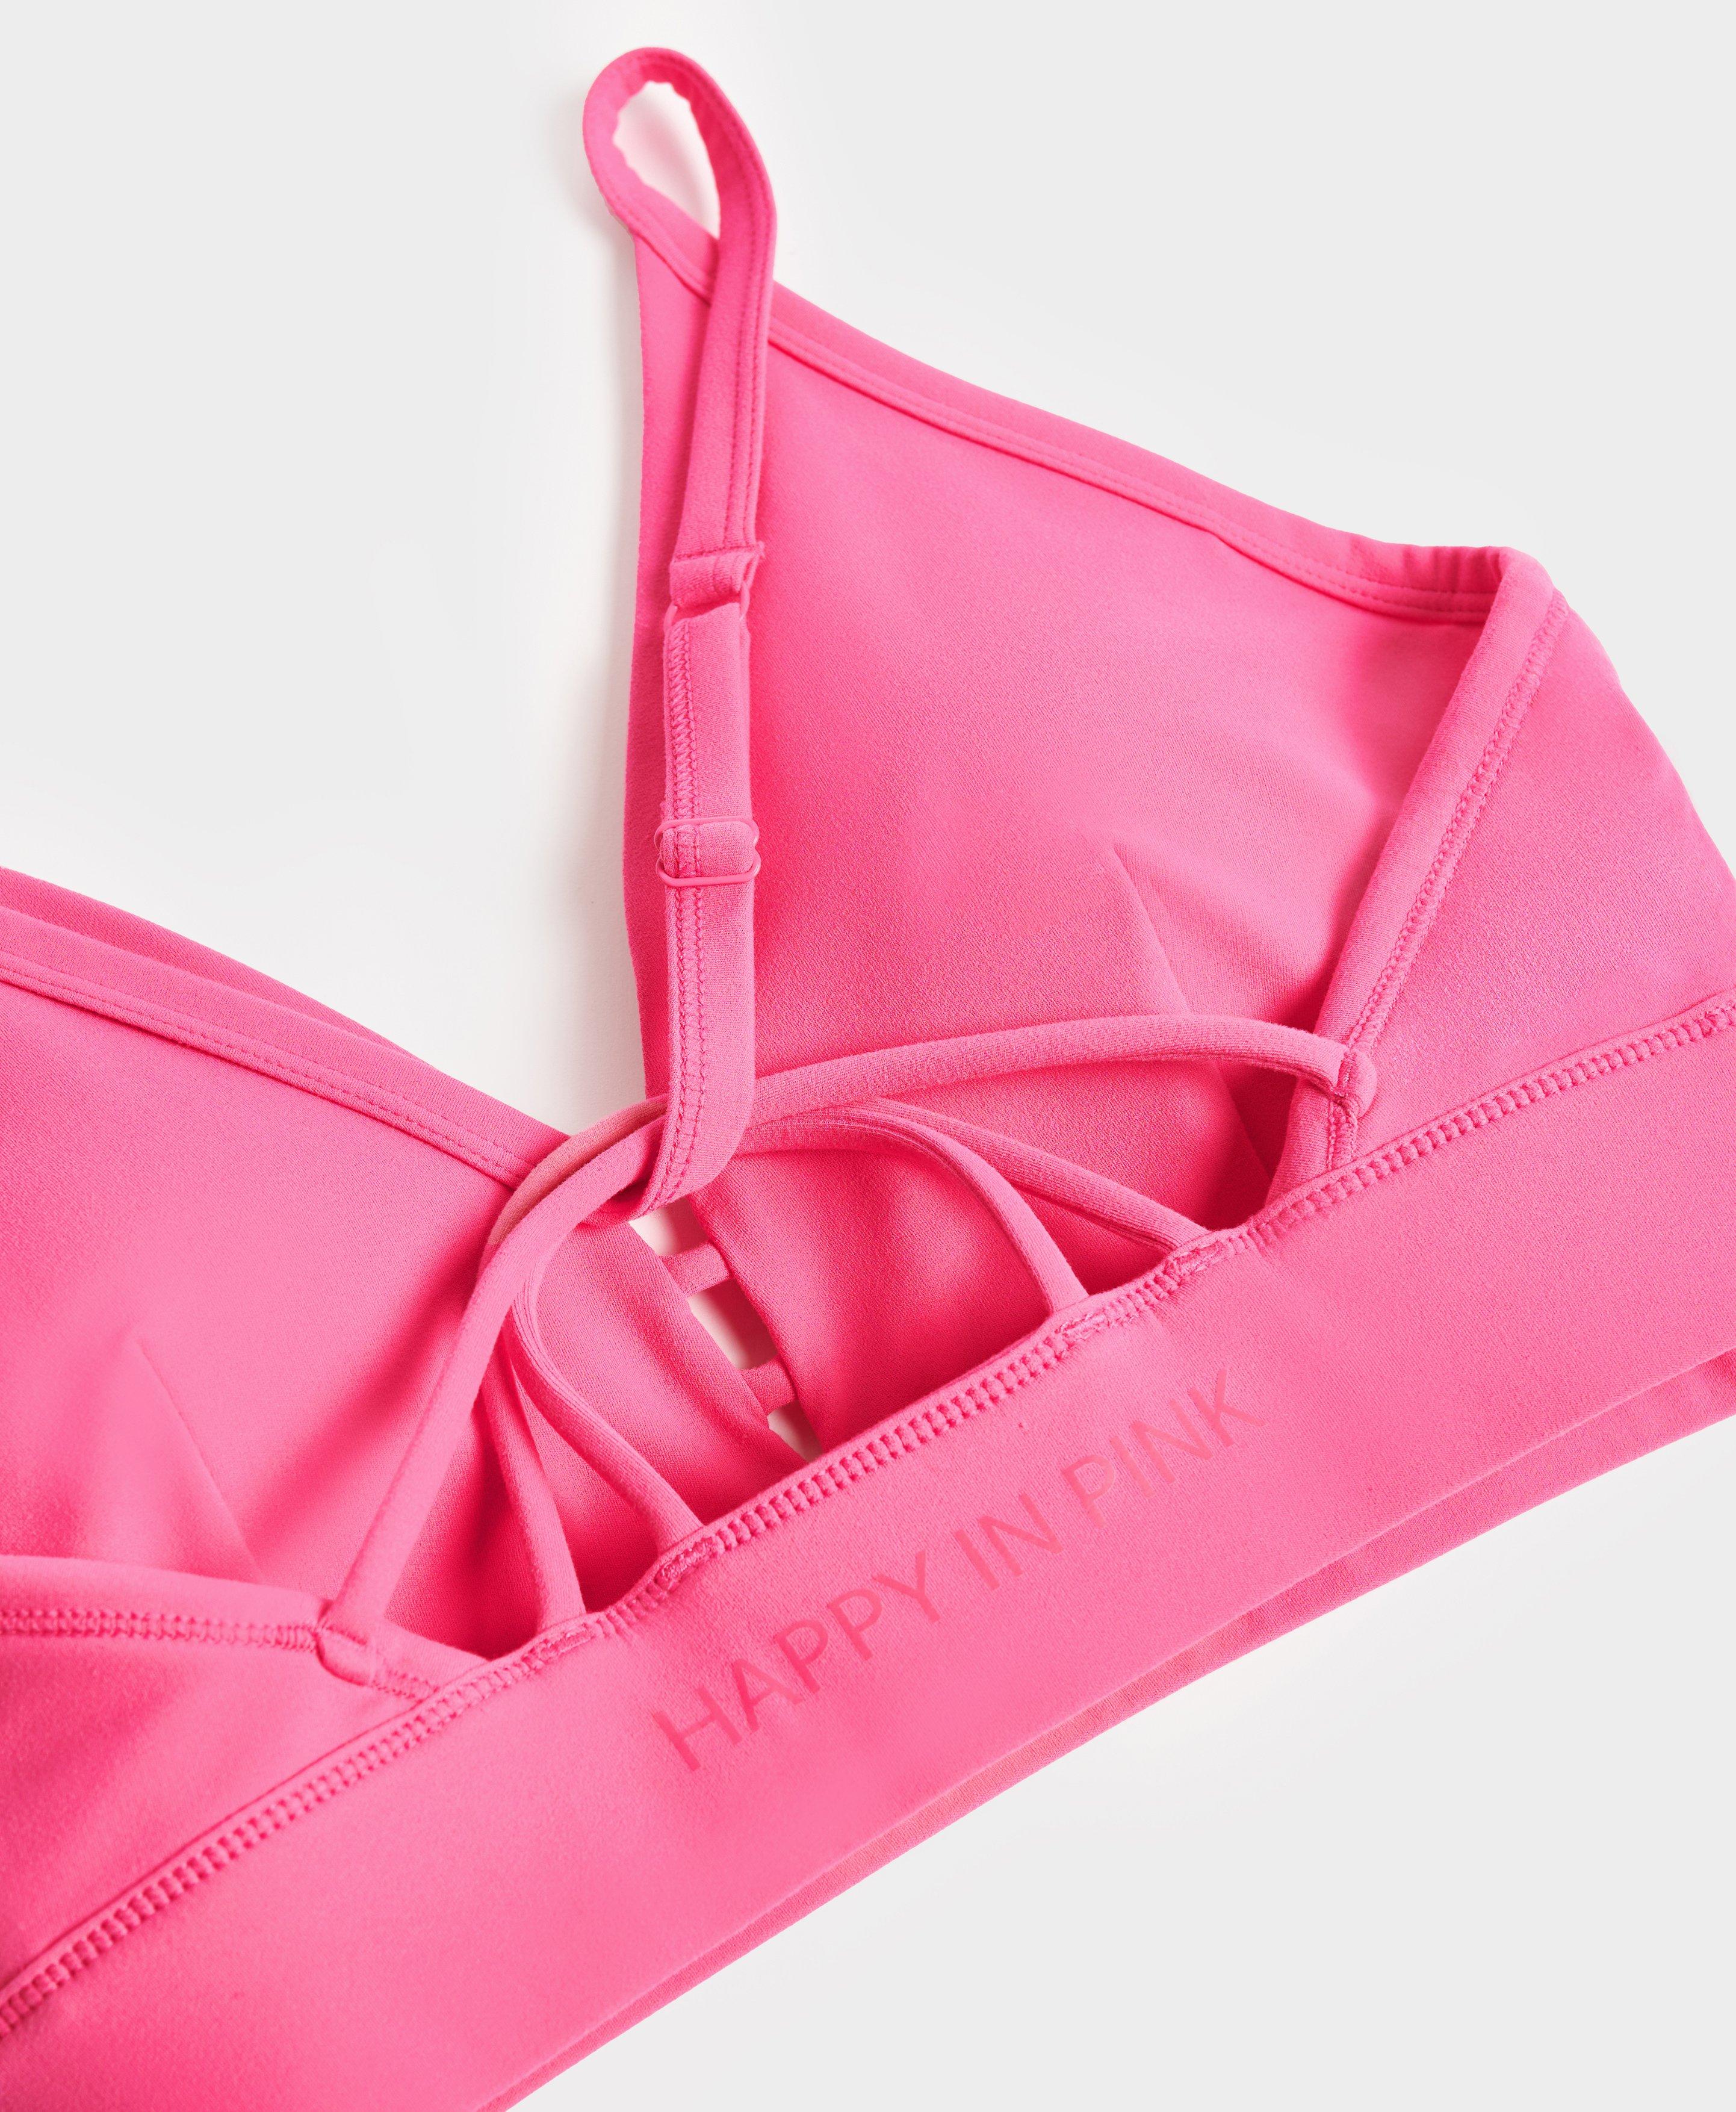 150 Sweaty Woman Pink Sport Bra Images, Stock Photos, 3D objects